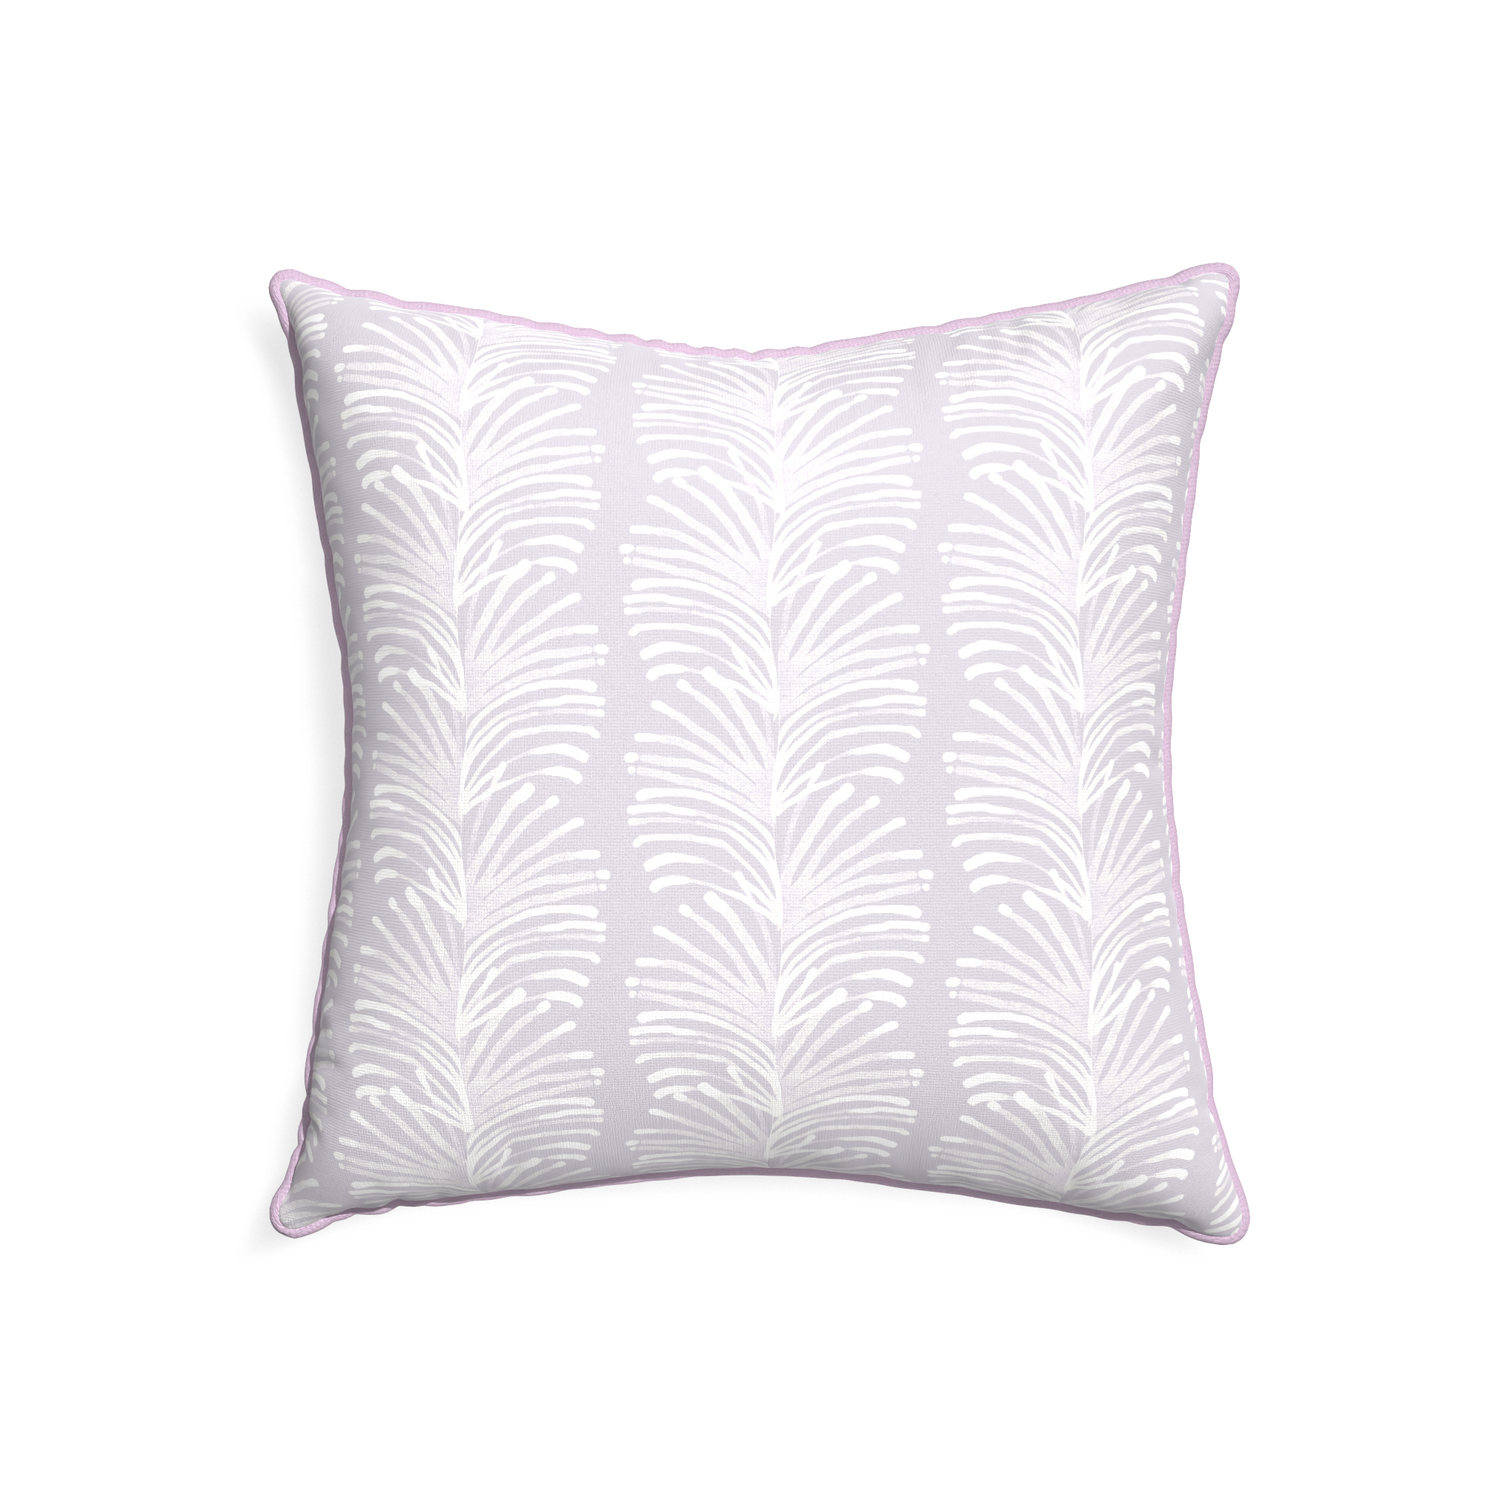 22-square emma lavender custom pillow with l piping on white background